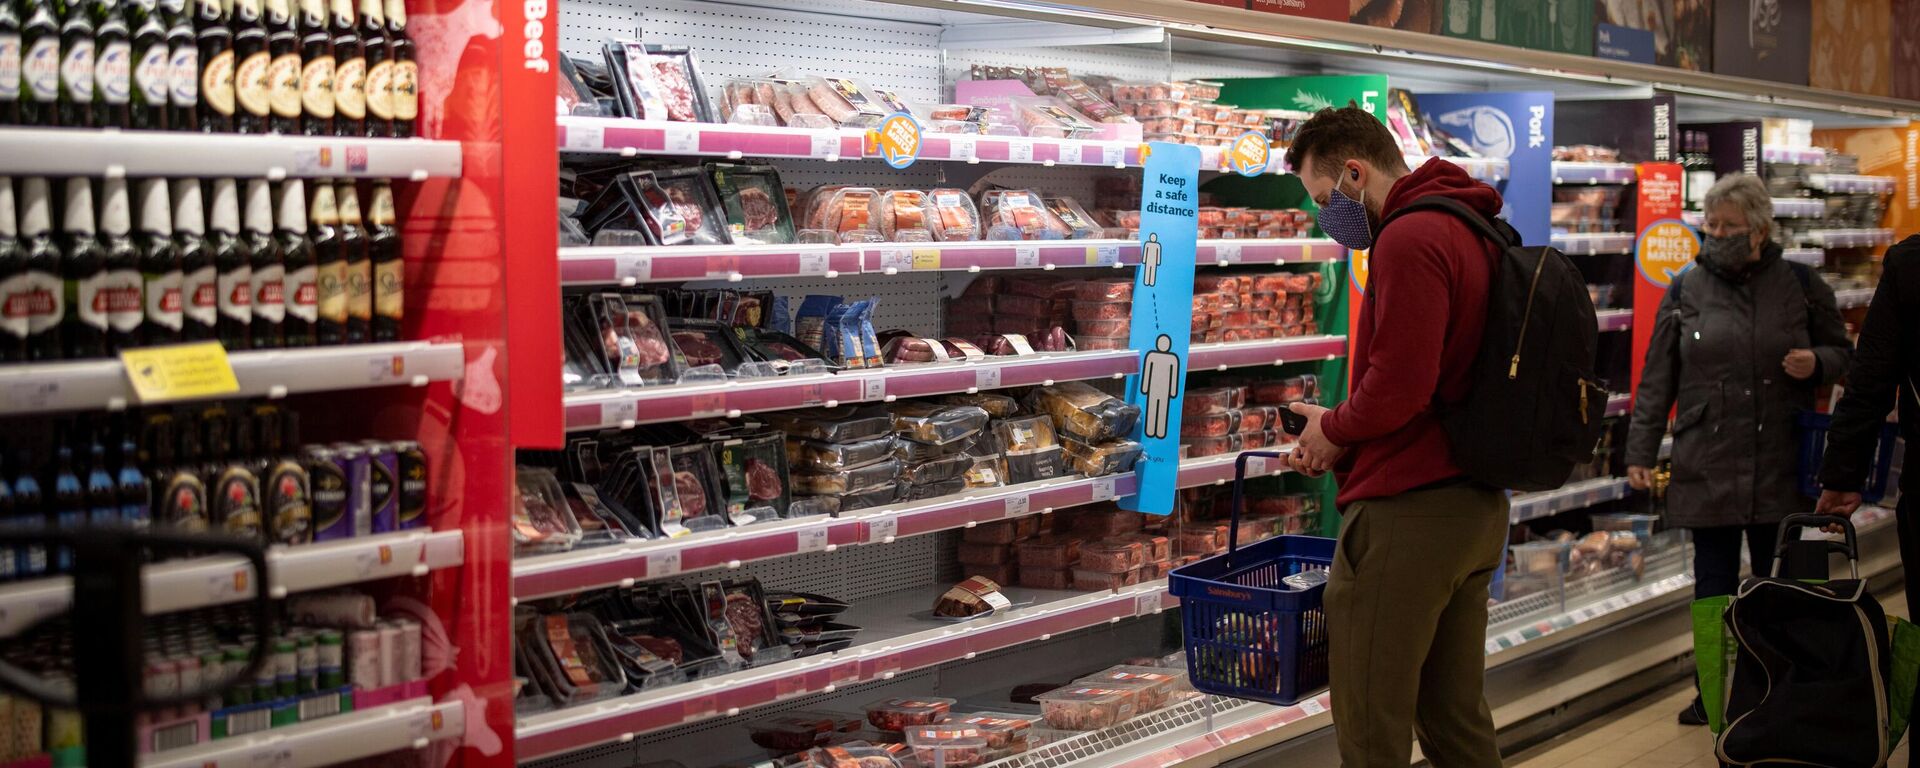 A customer shops for meat at a Sainsbury's supermarket in Walthamstow, east London on February 13, 2022 - Sputnik International, 1920, 17.06.2022